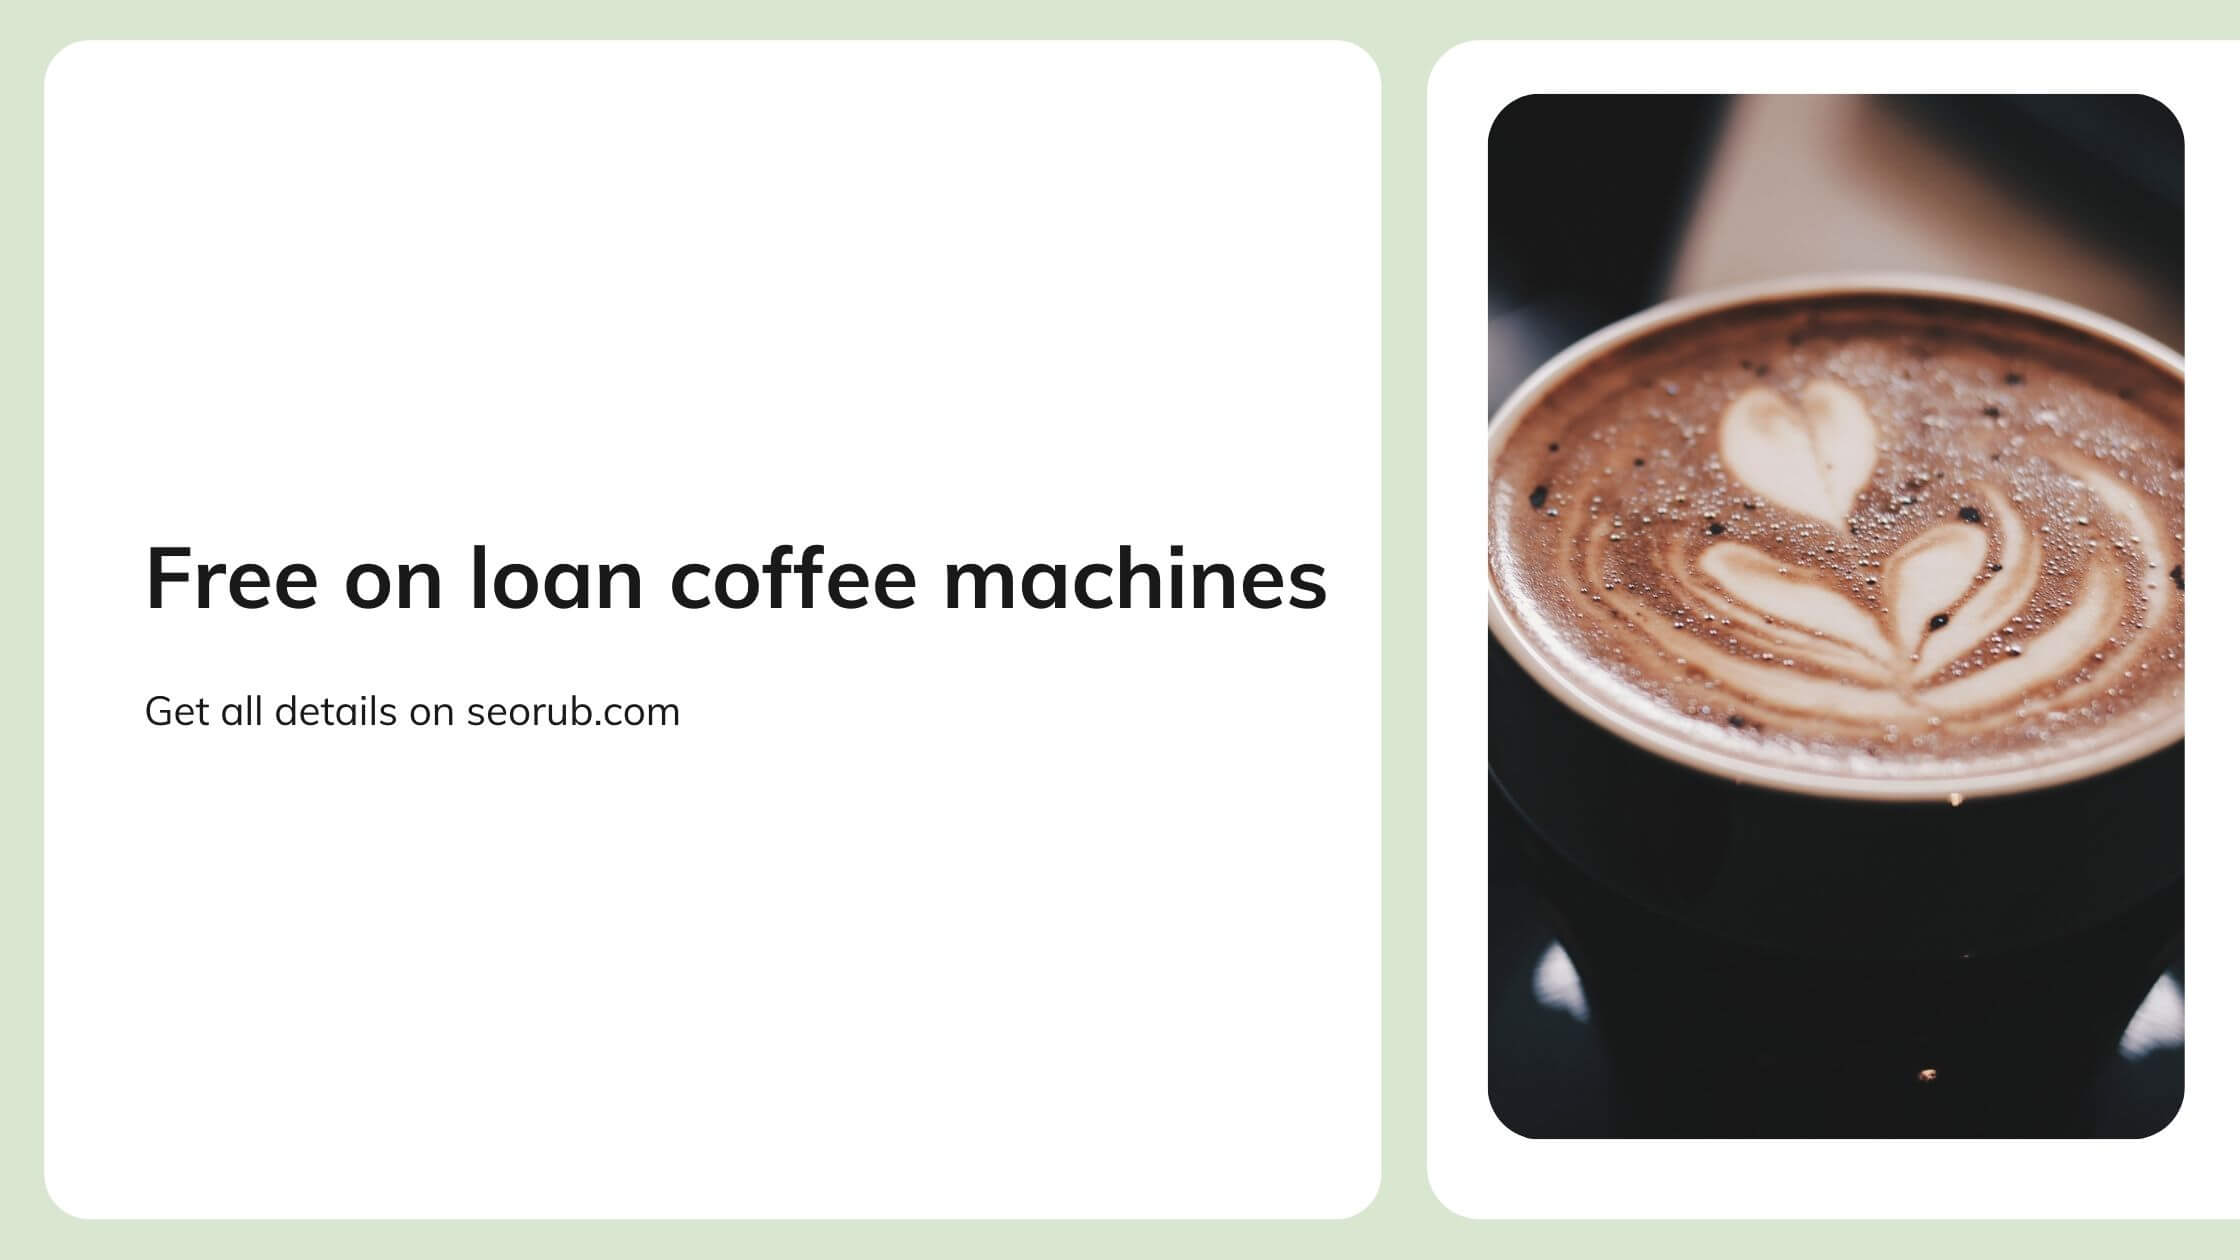 How can get free on loan coffee machines to start?